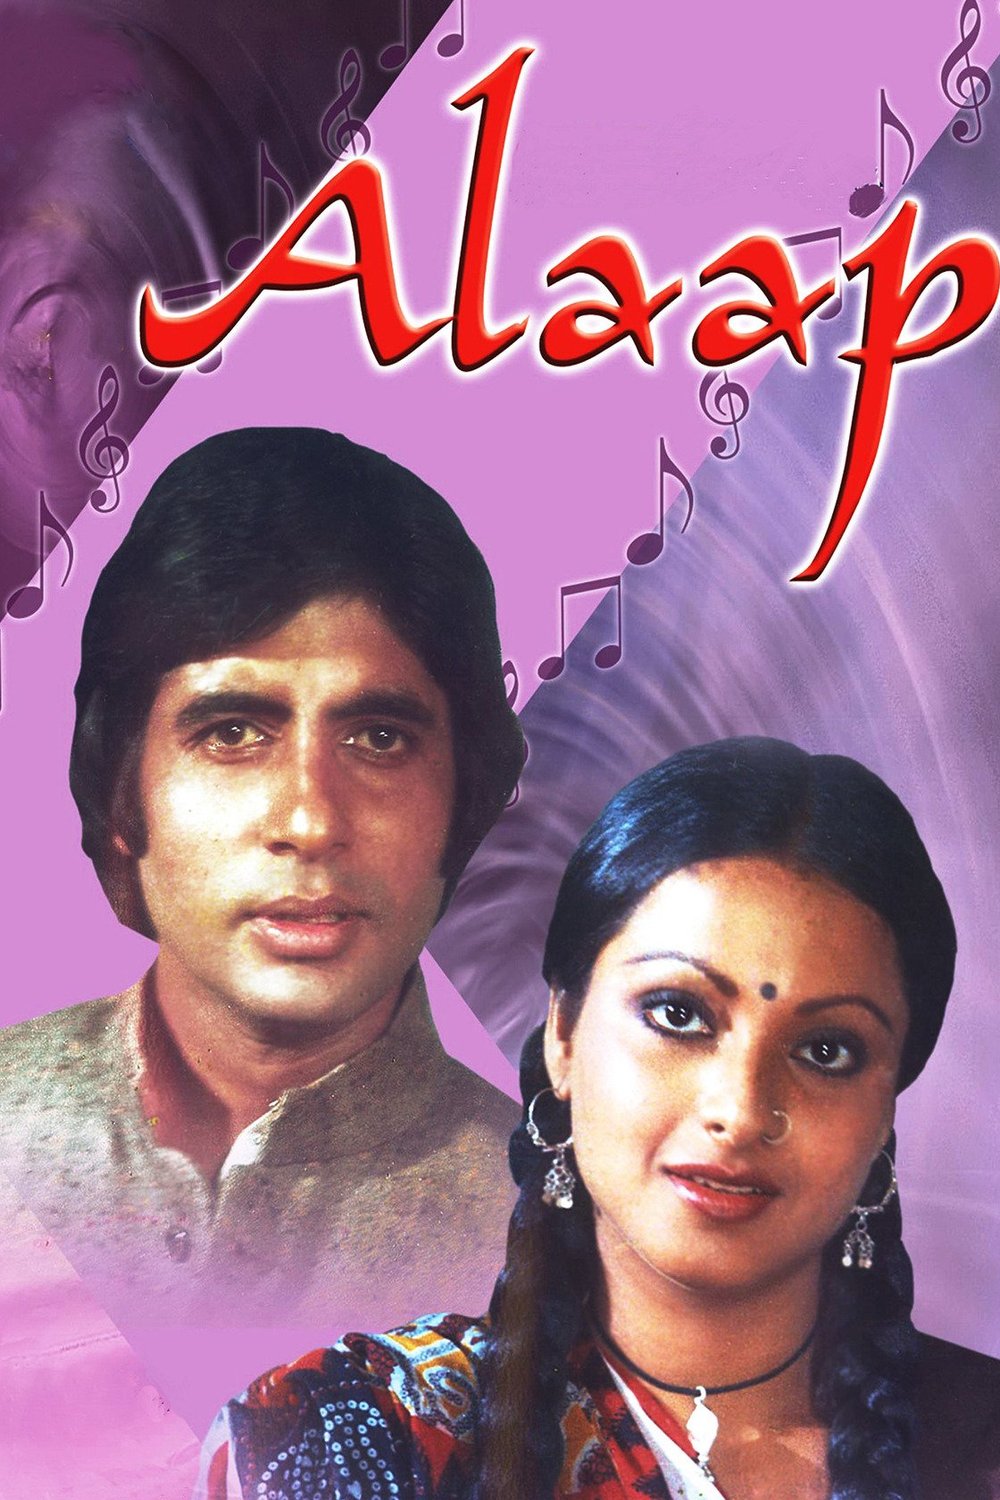 Hindi poster of the movie Alaap